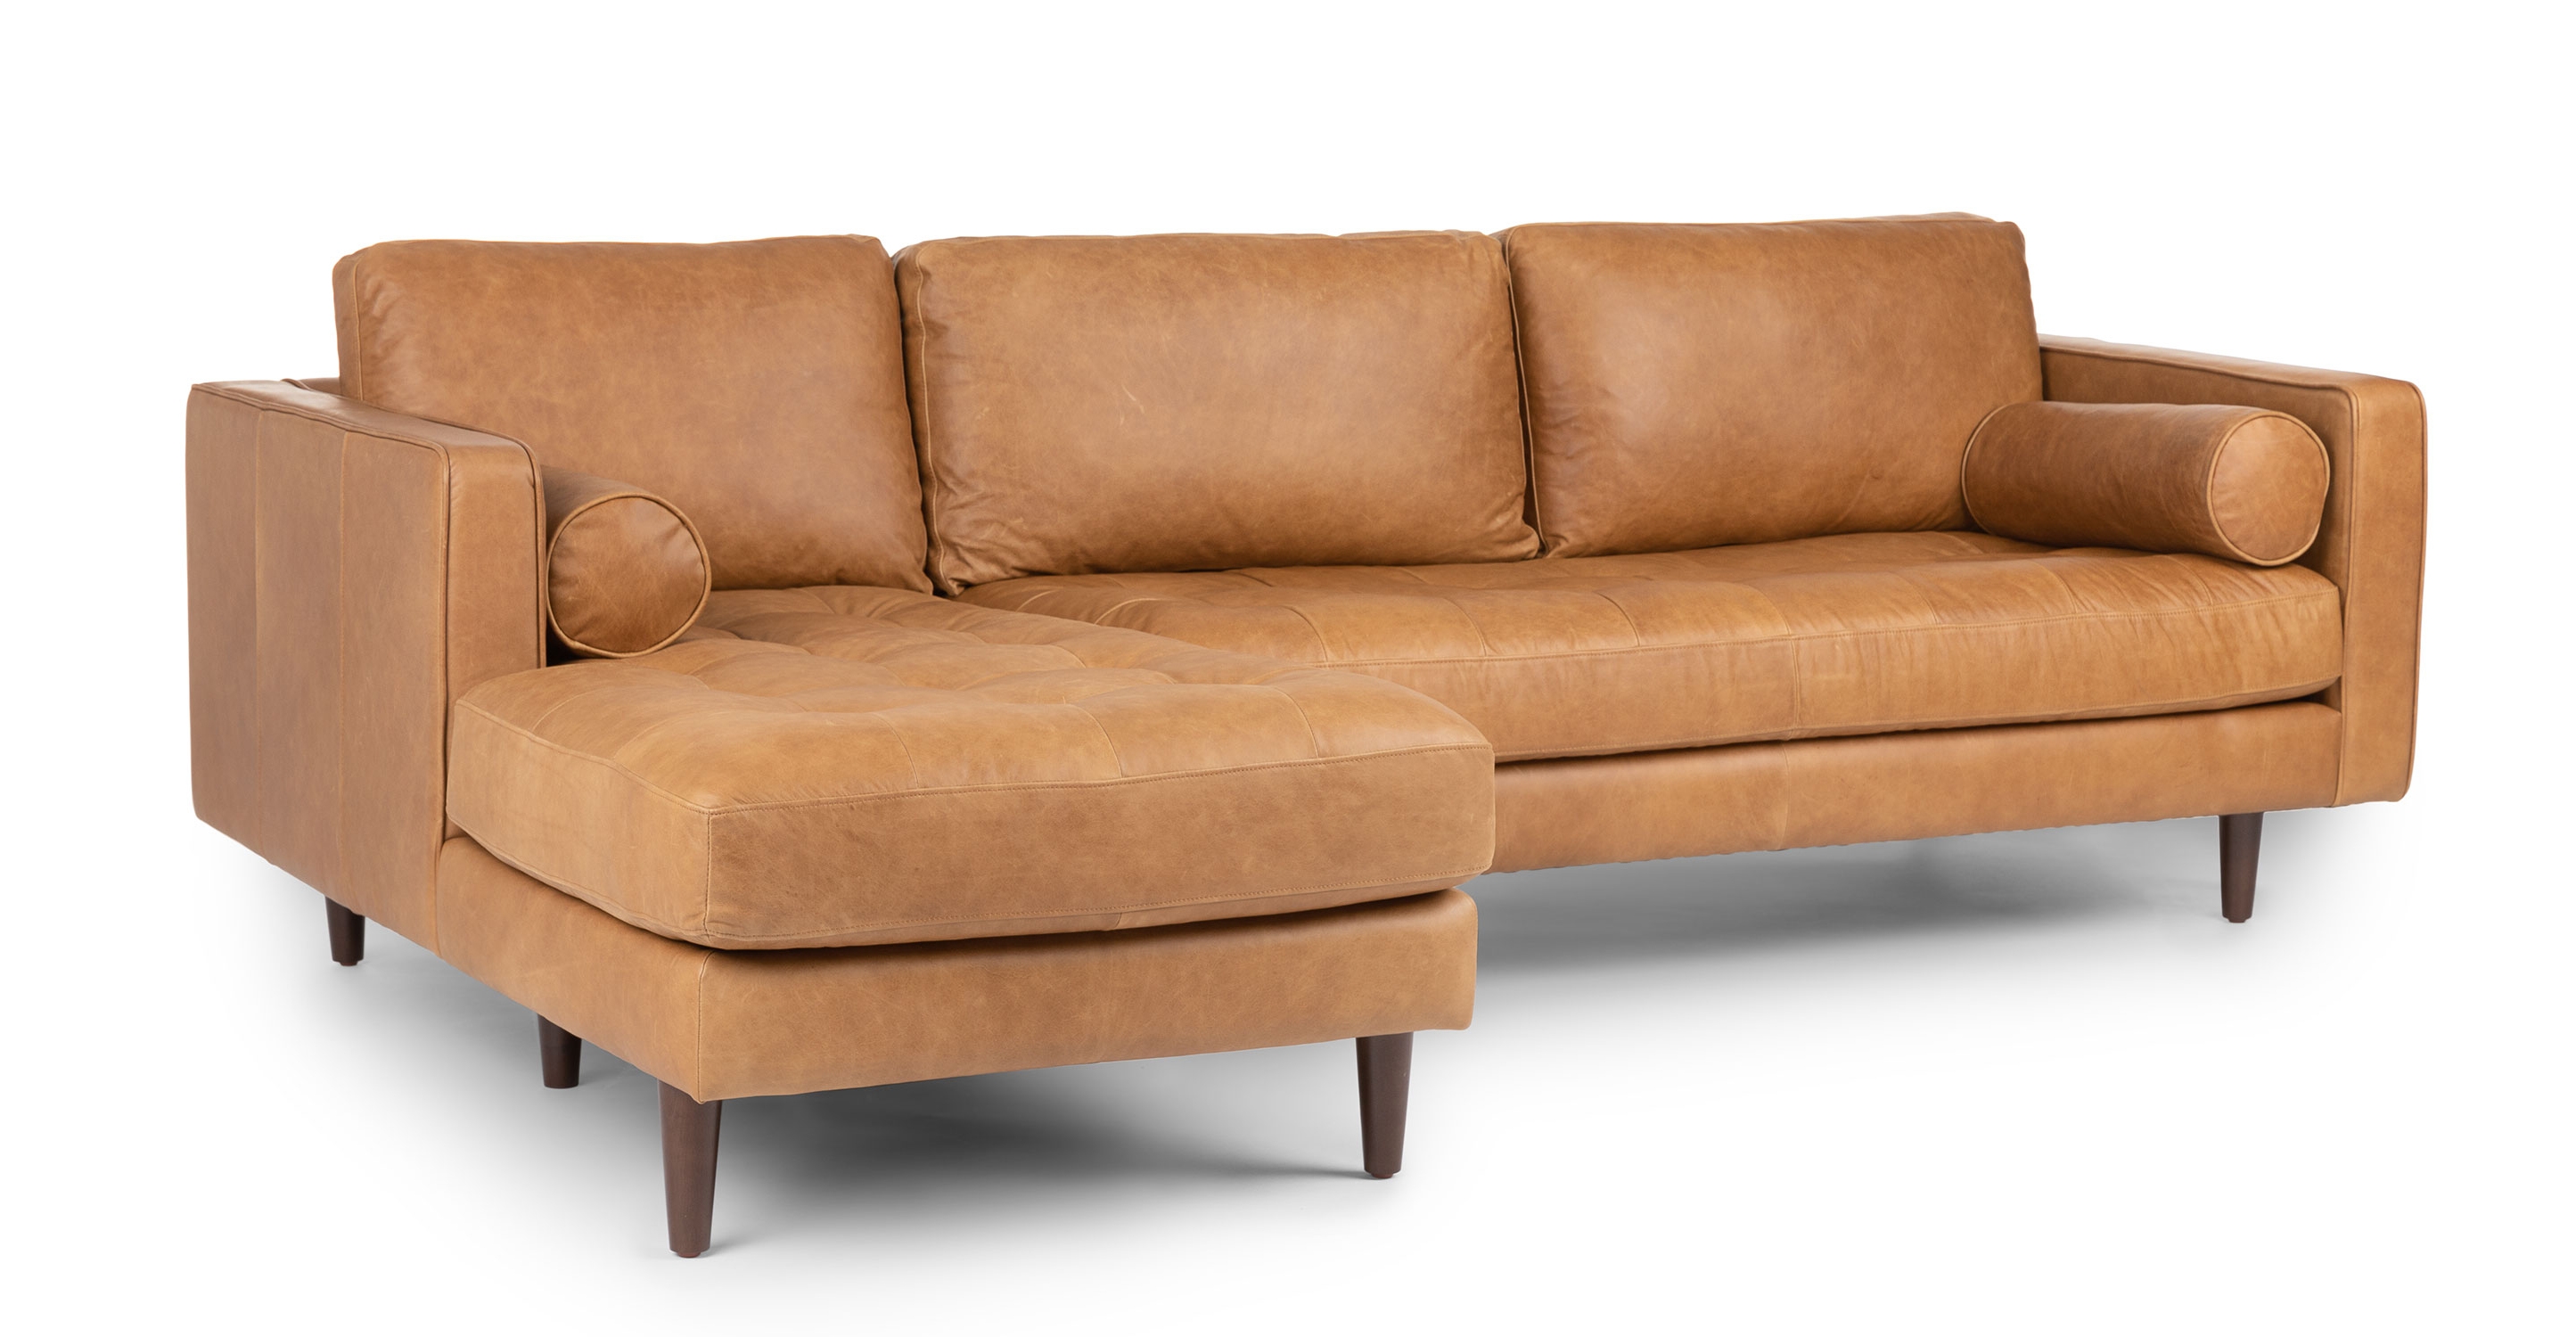 Sven sectional - Left Chaise - Image 1